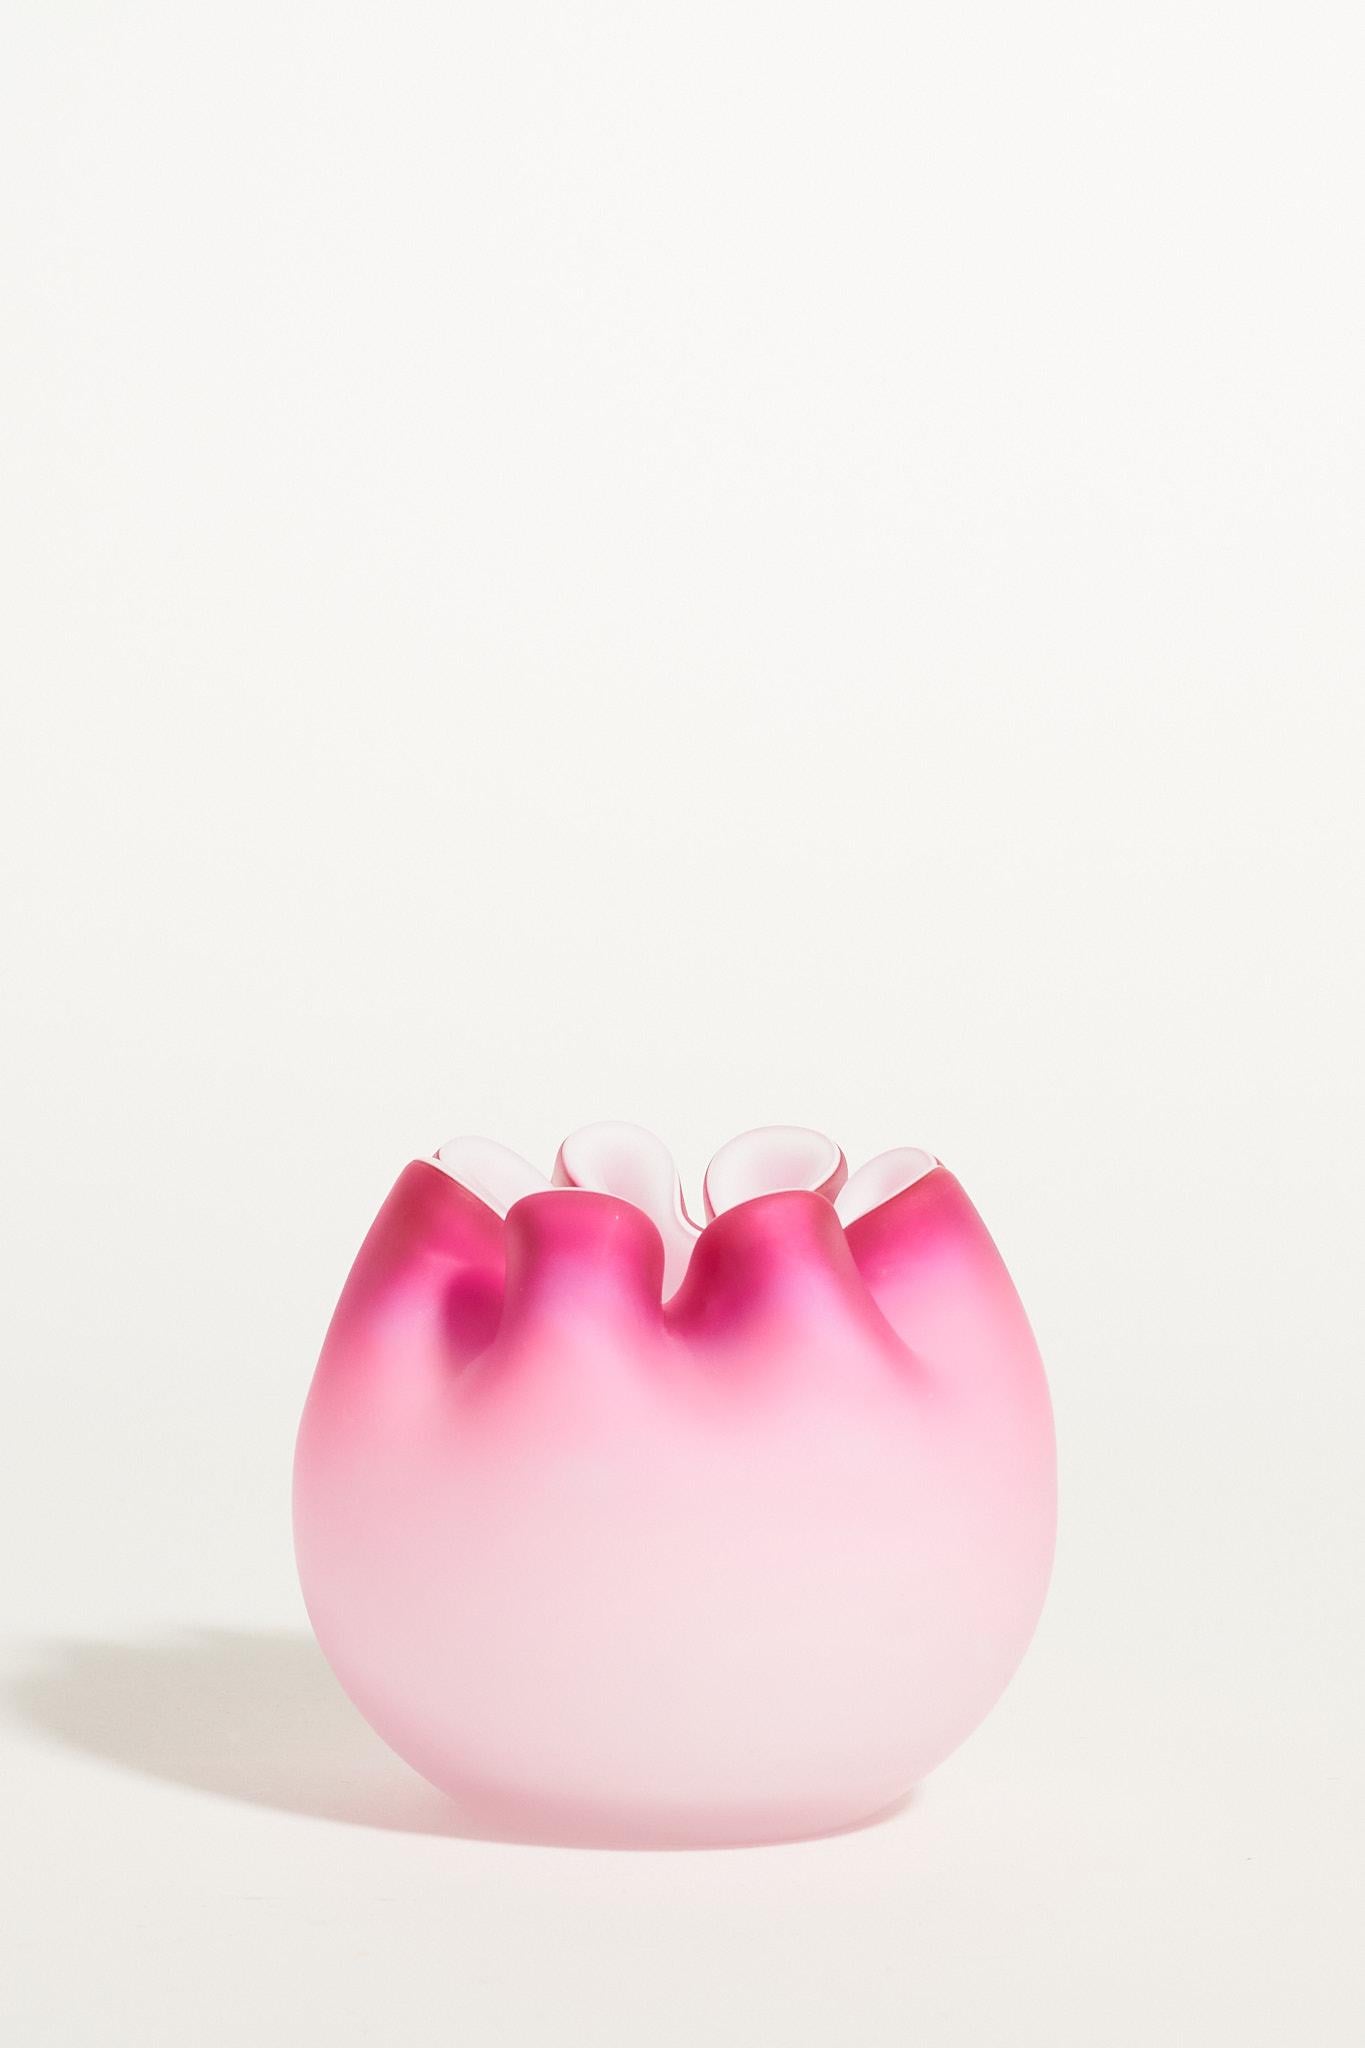 Ombré dark to light pink round matte glass vase with ruffled mouth.